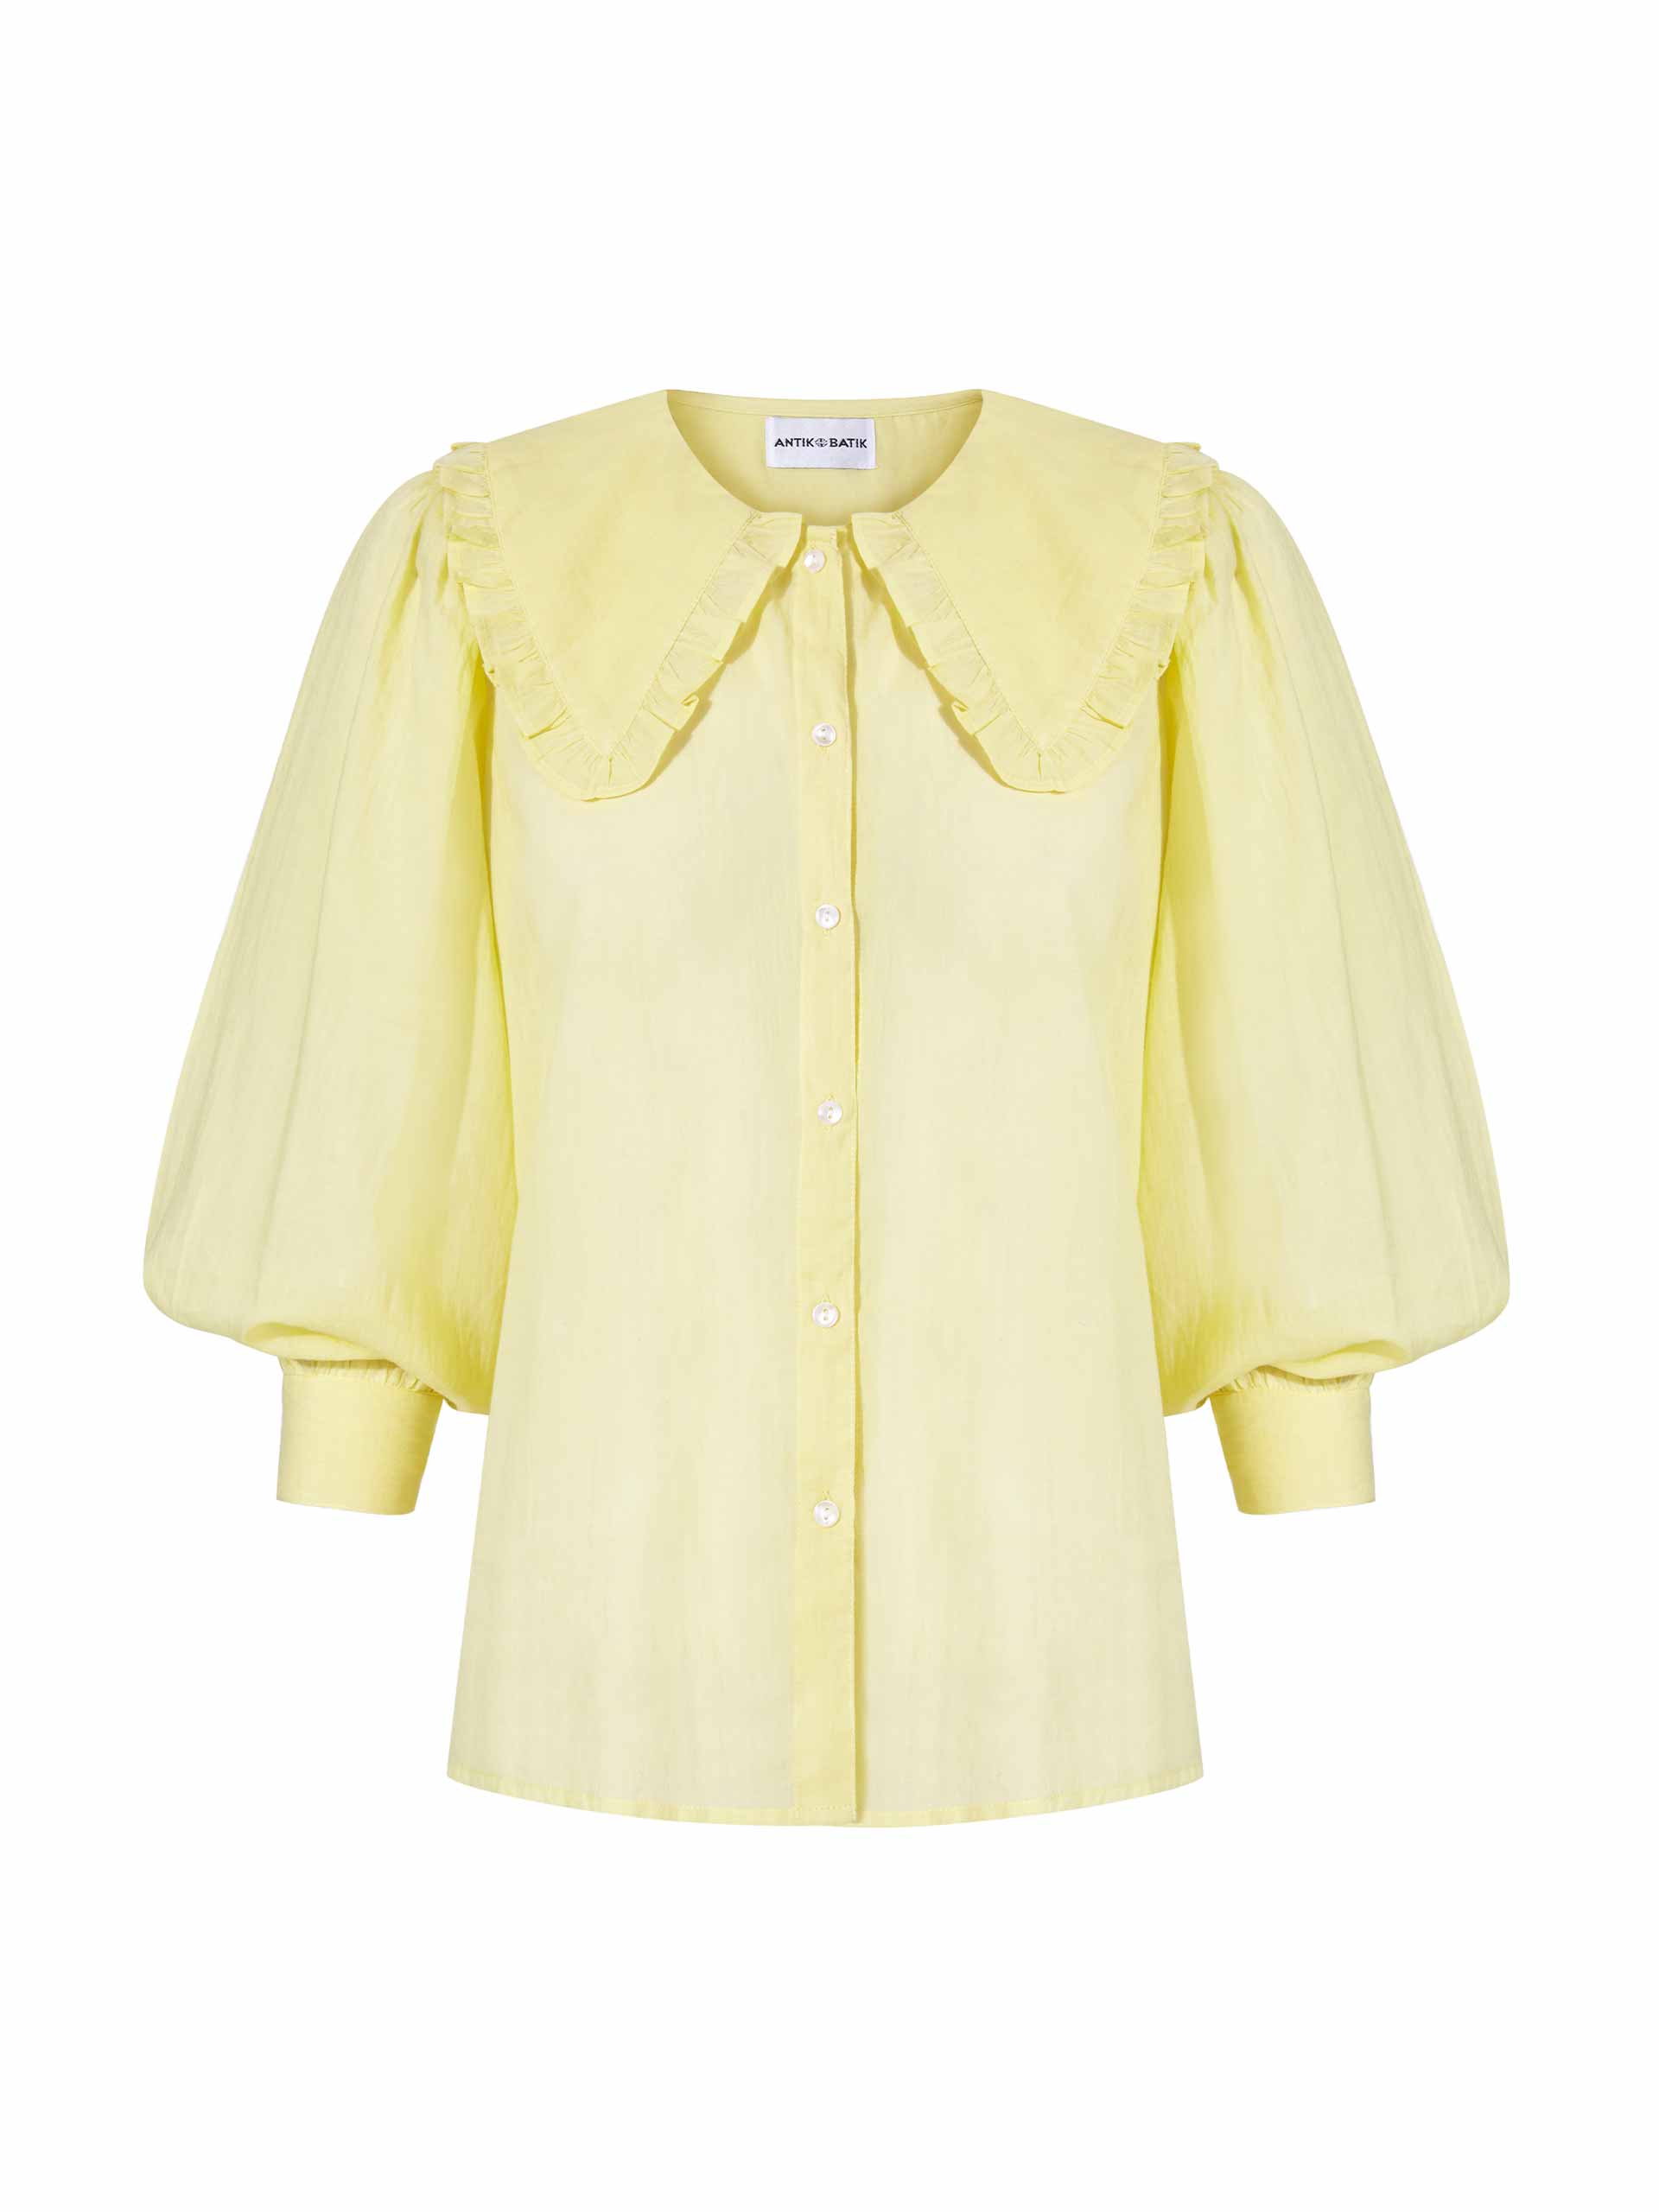 Pastel yellow peter pan collar blouse - Collagerie.com